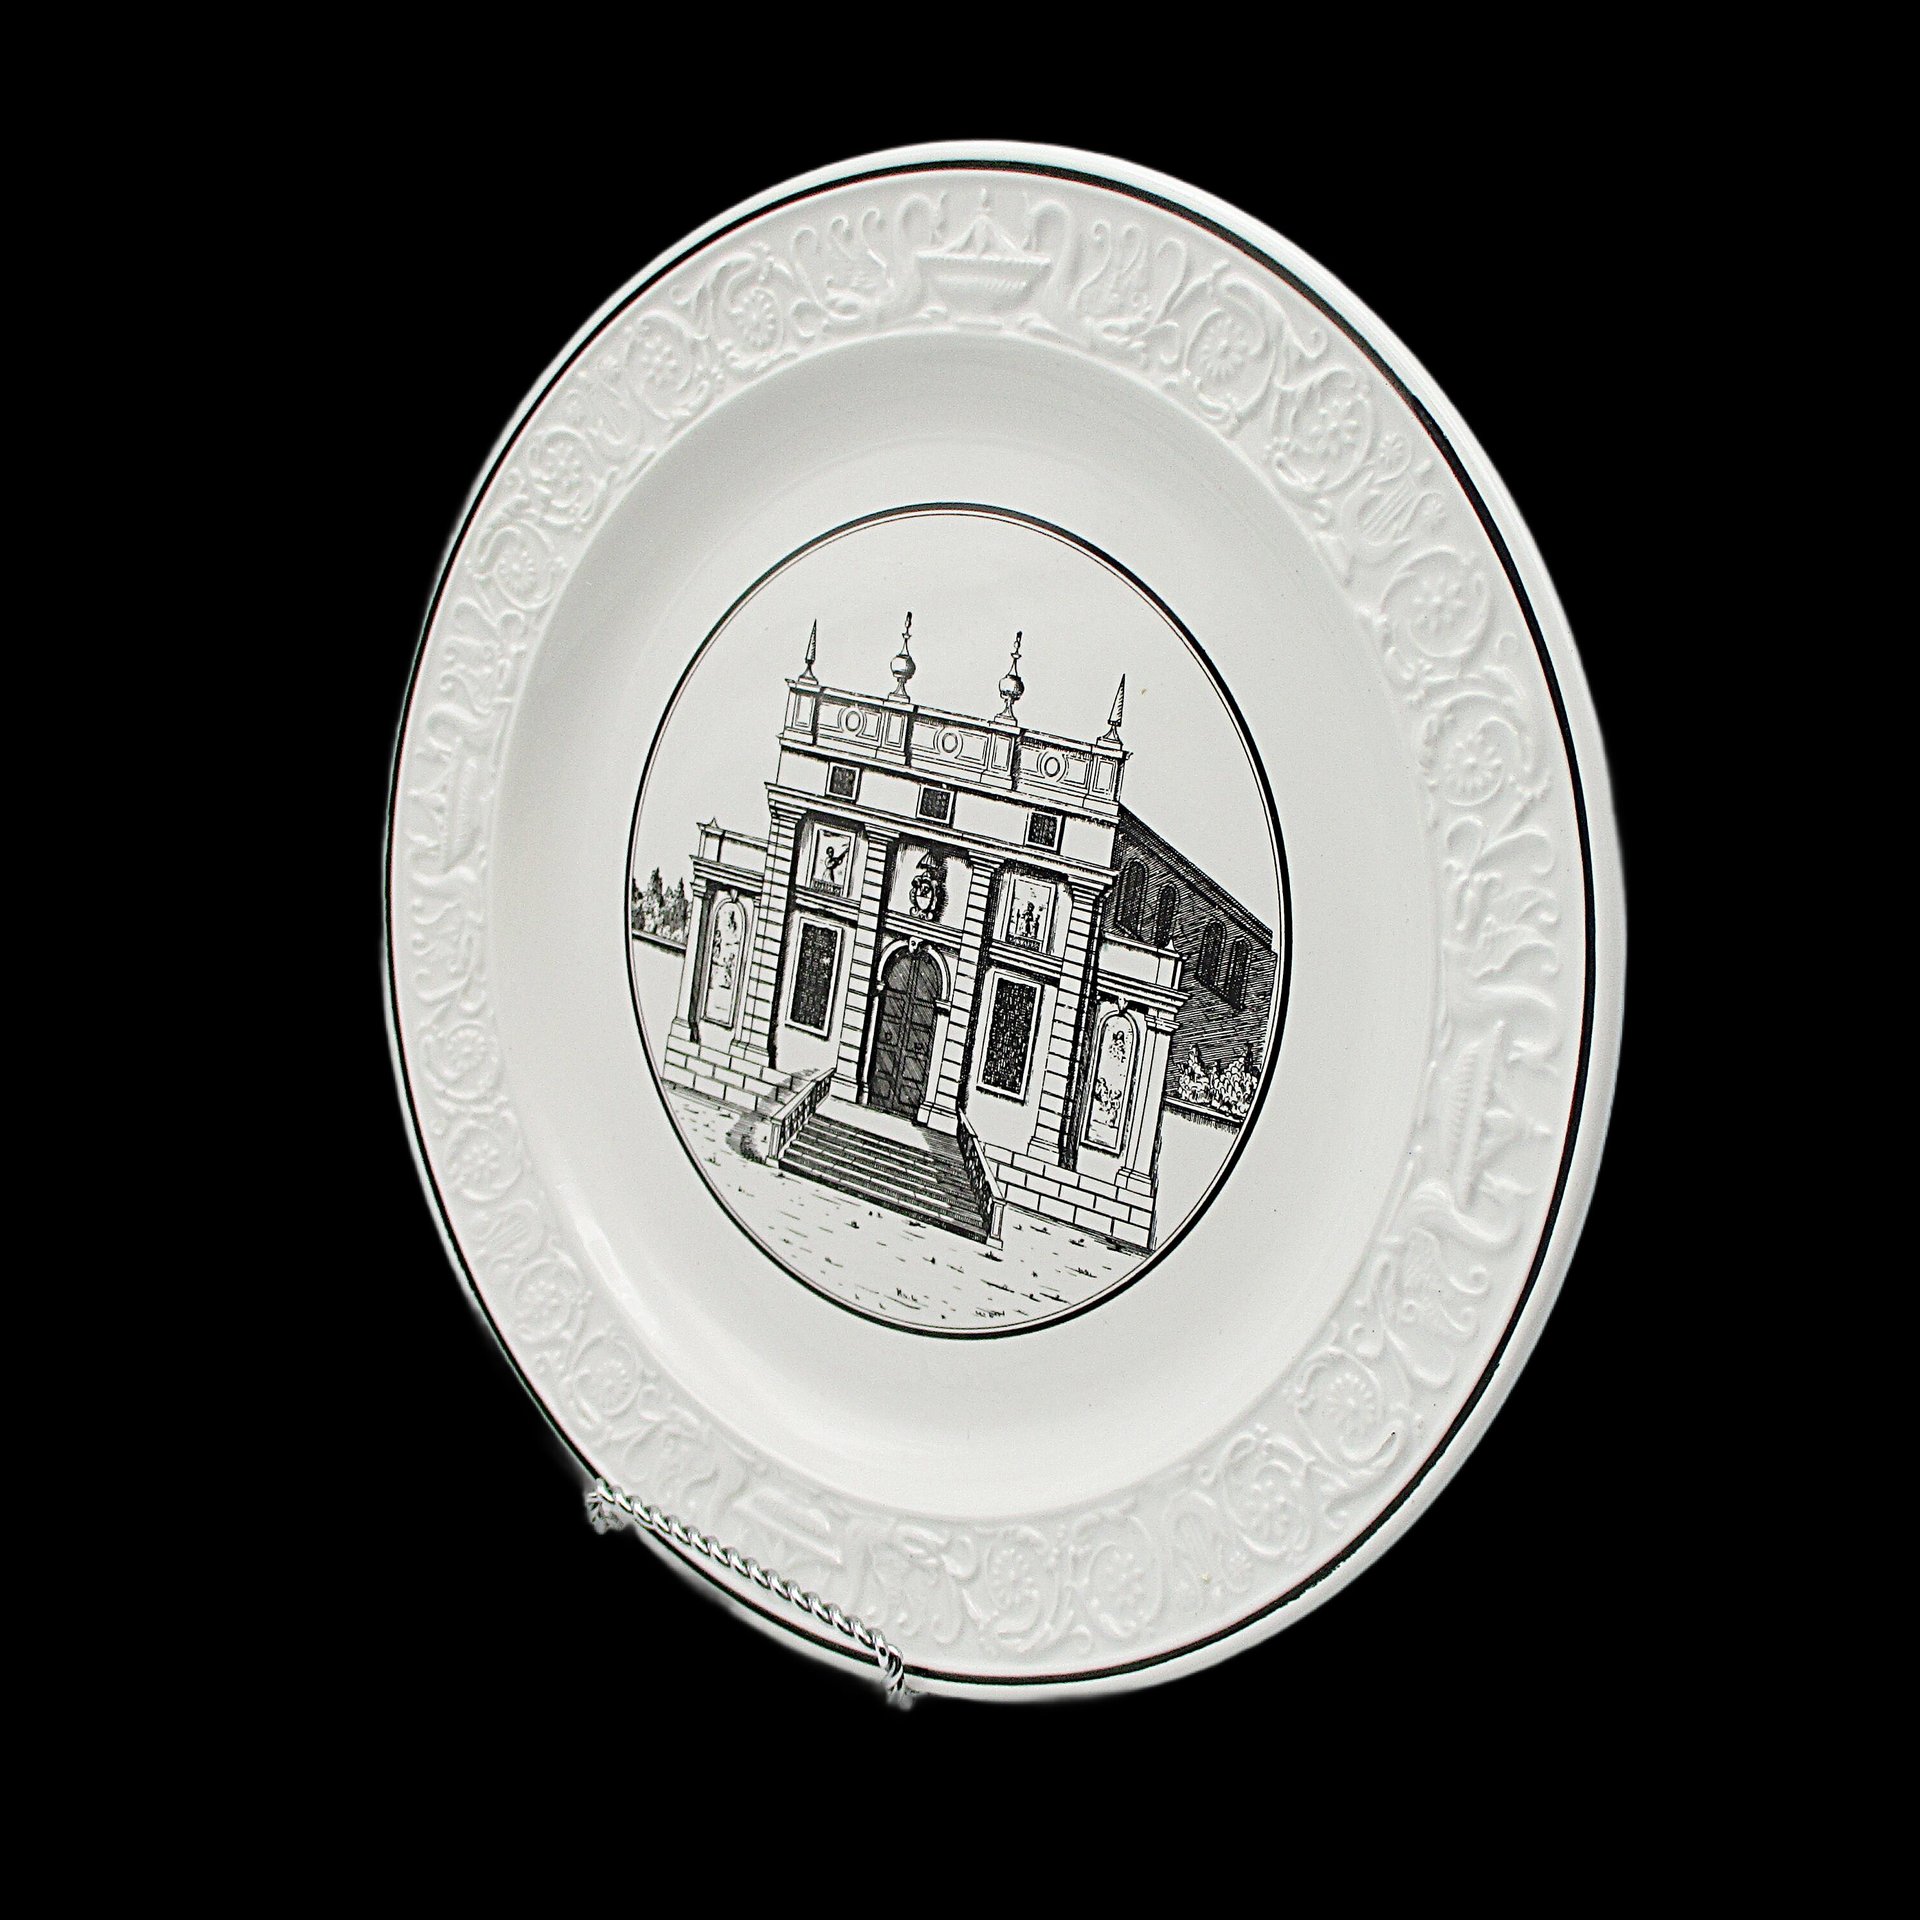 Mottahedeh Dinner Plate, Neoclassical Architectural Building, 10 Inch, Black on White, Made in Italy